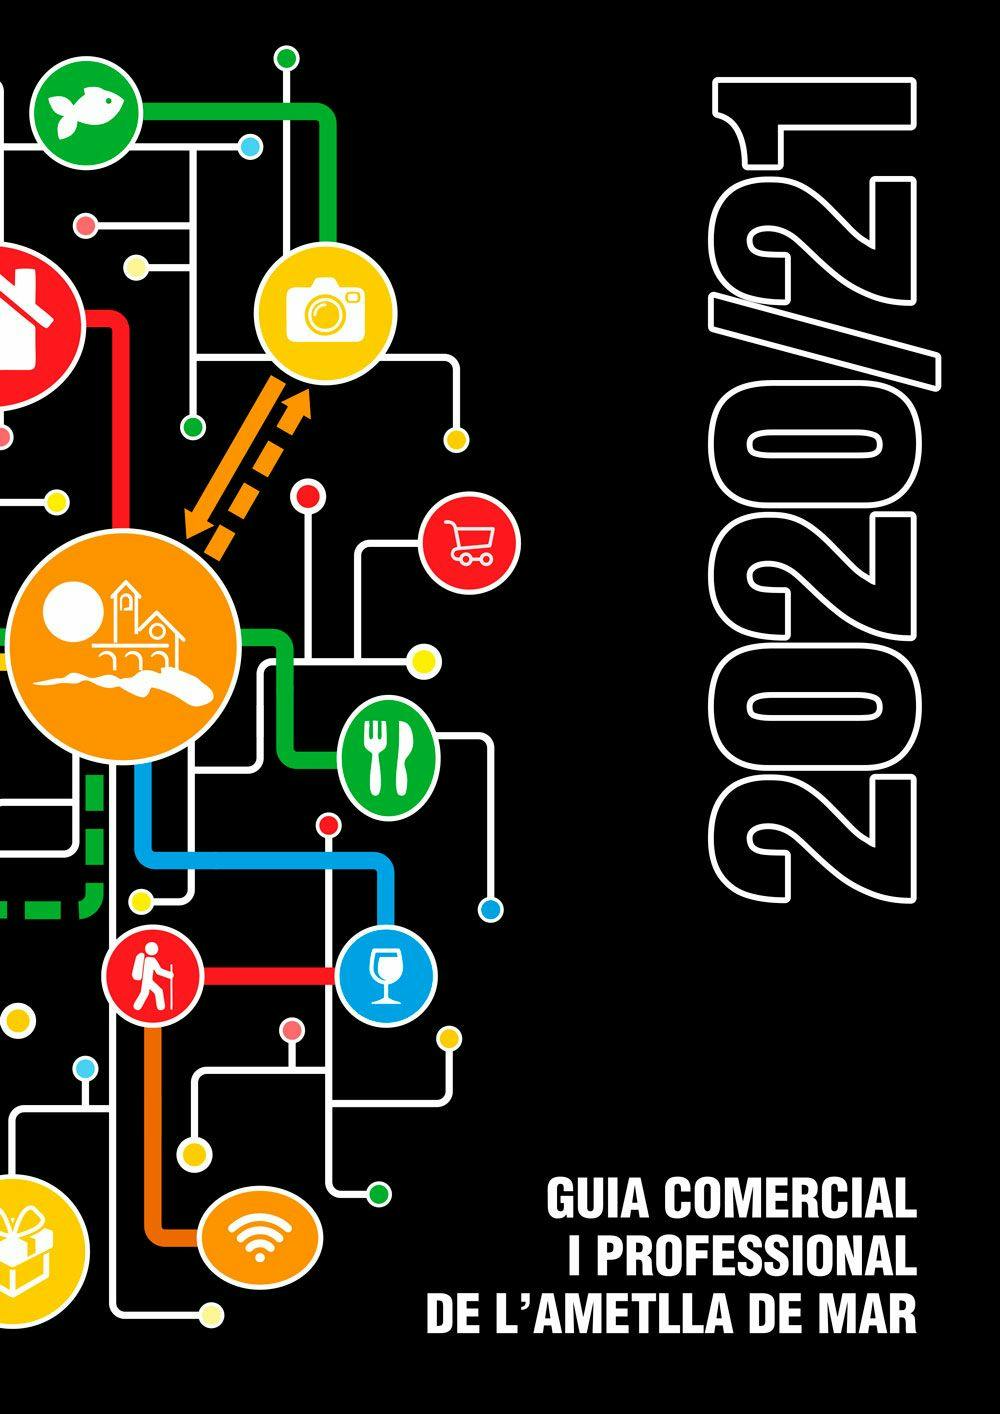 Commercial Guide 2020/2021